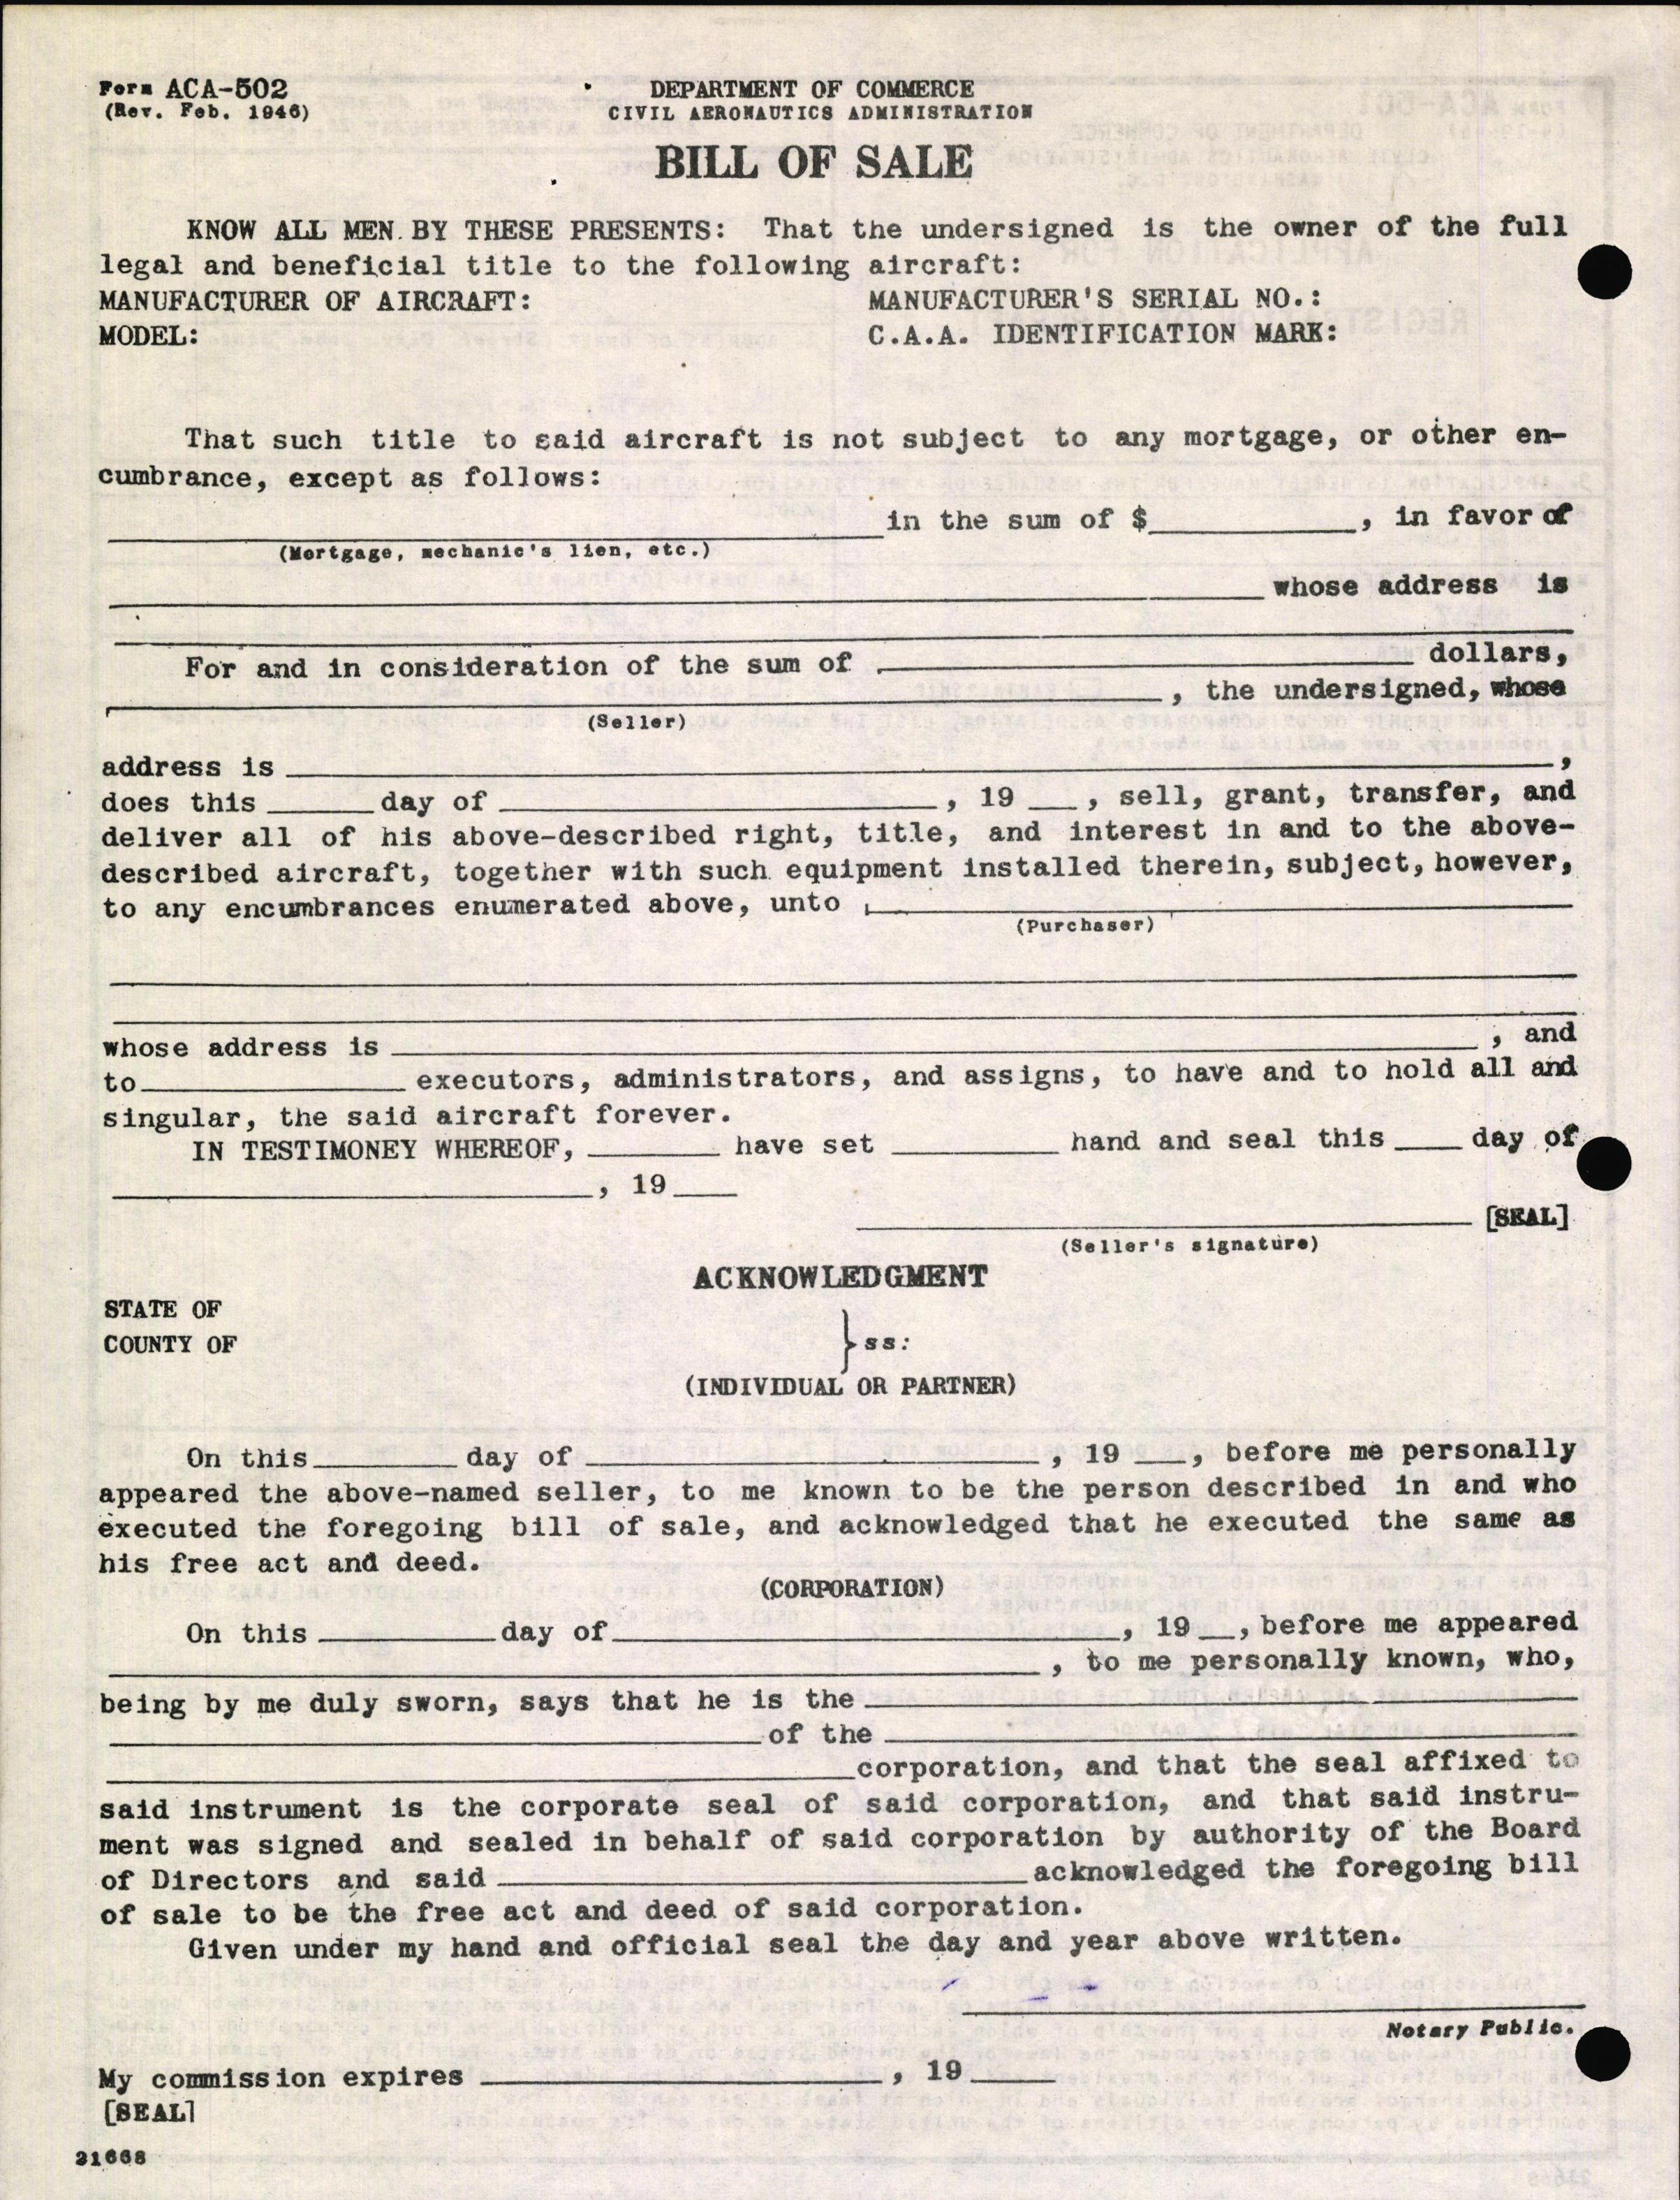 Sample page 4 from AirCorps Library document: Technical Information for Serial Number 2157